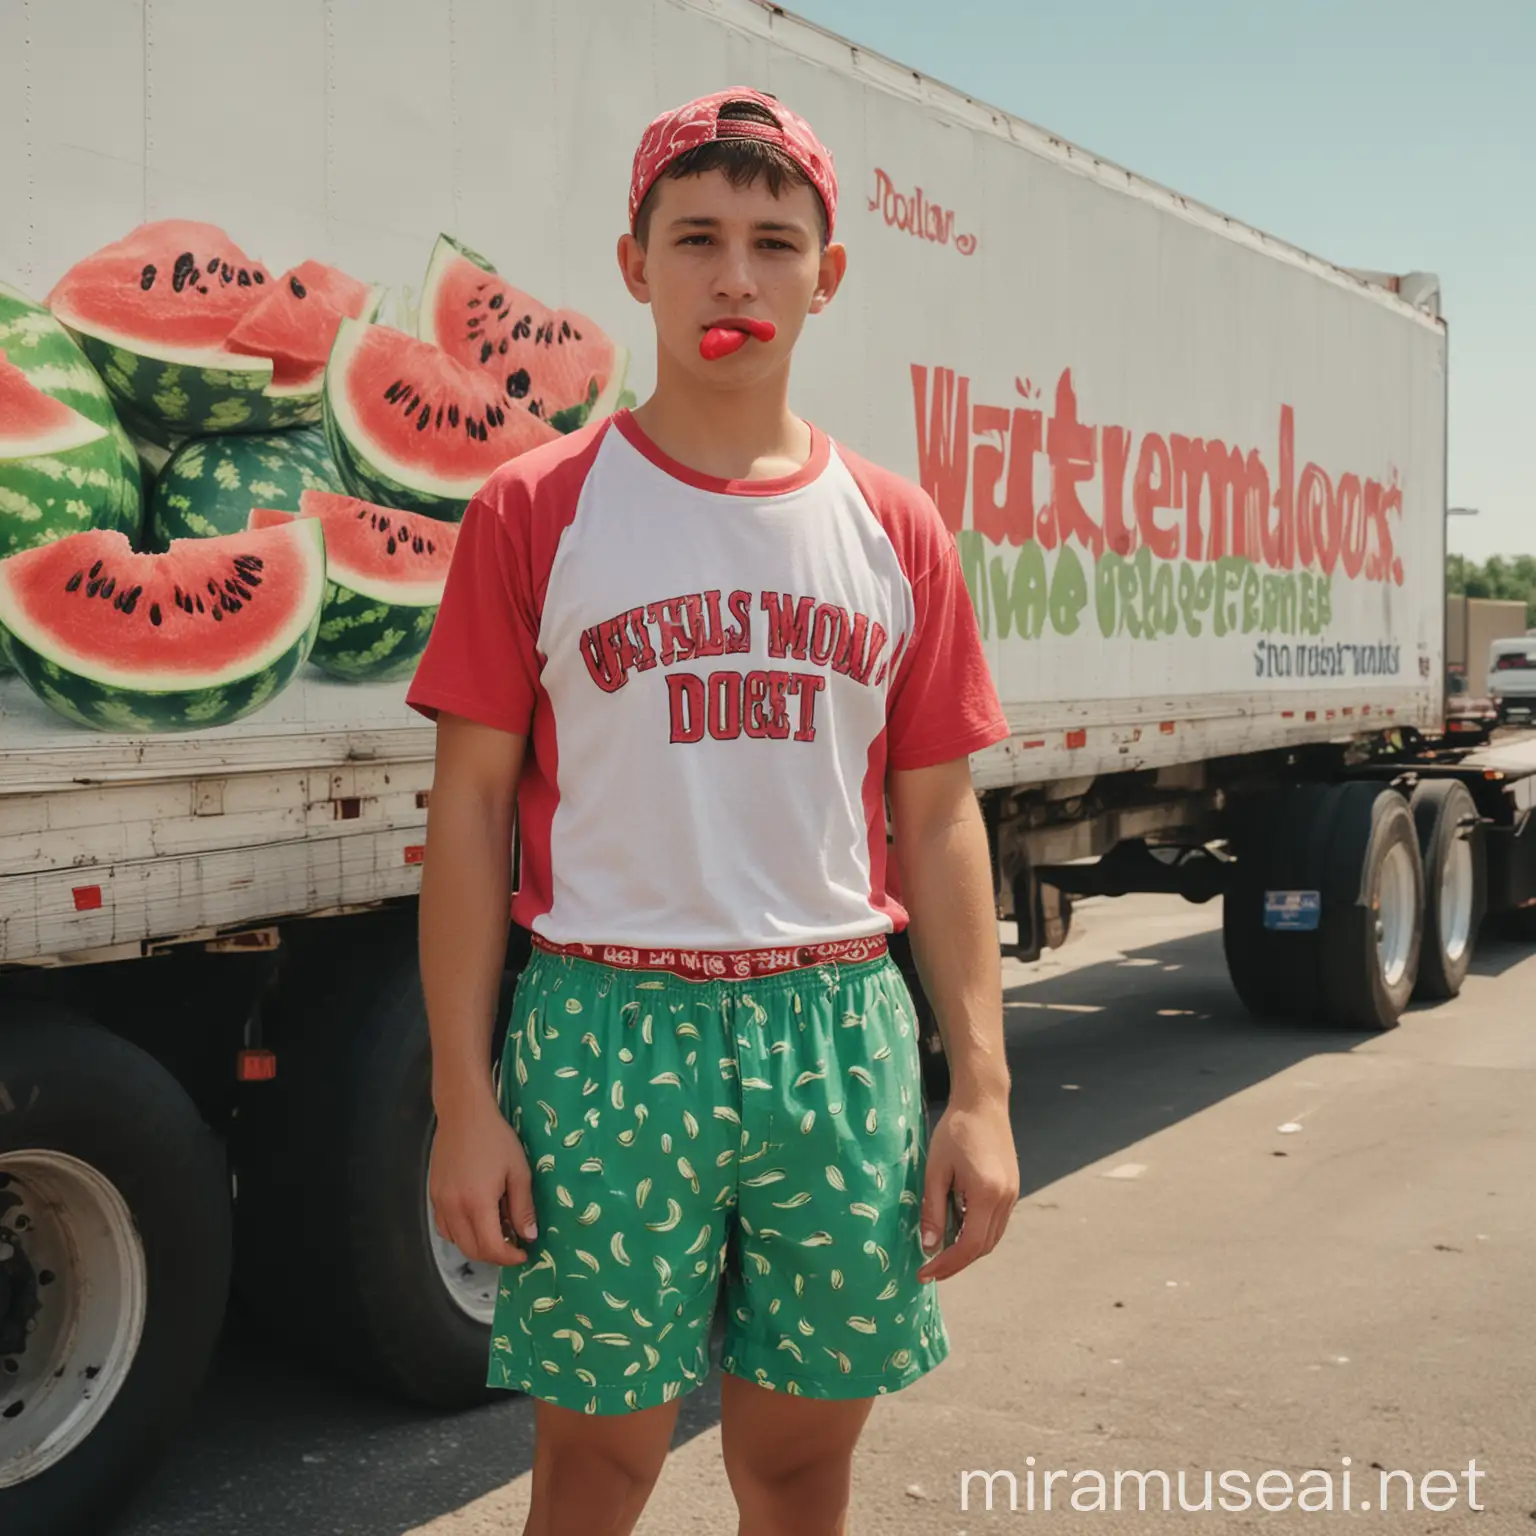 Ikbol, Isakov, Ikbolzhon, Chicago, Jewel Osco, Dollar, watermelons from Florida, seling watermelon in semi trailer truck, in shorts and old T-shirt, smoking,